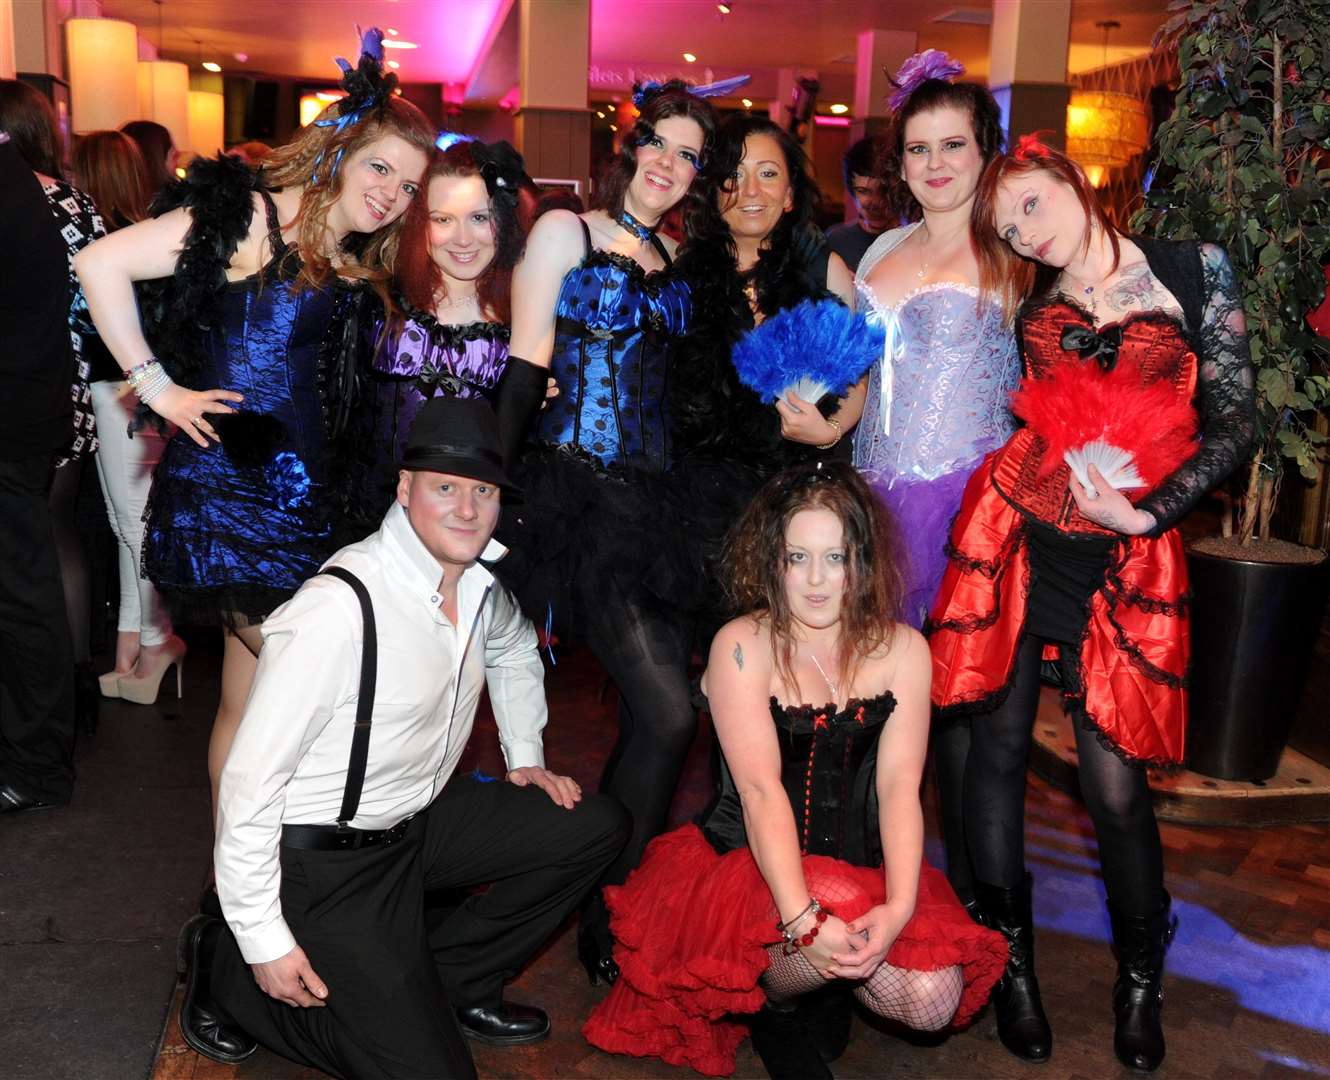 Moulin Rouge theme for Elaine MacQueen (centre, in back and blue) and friends on her 32nd birthday.